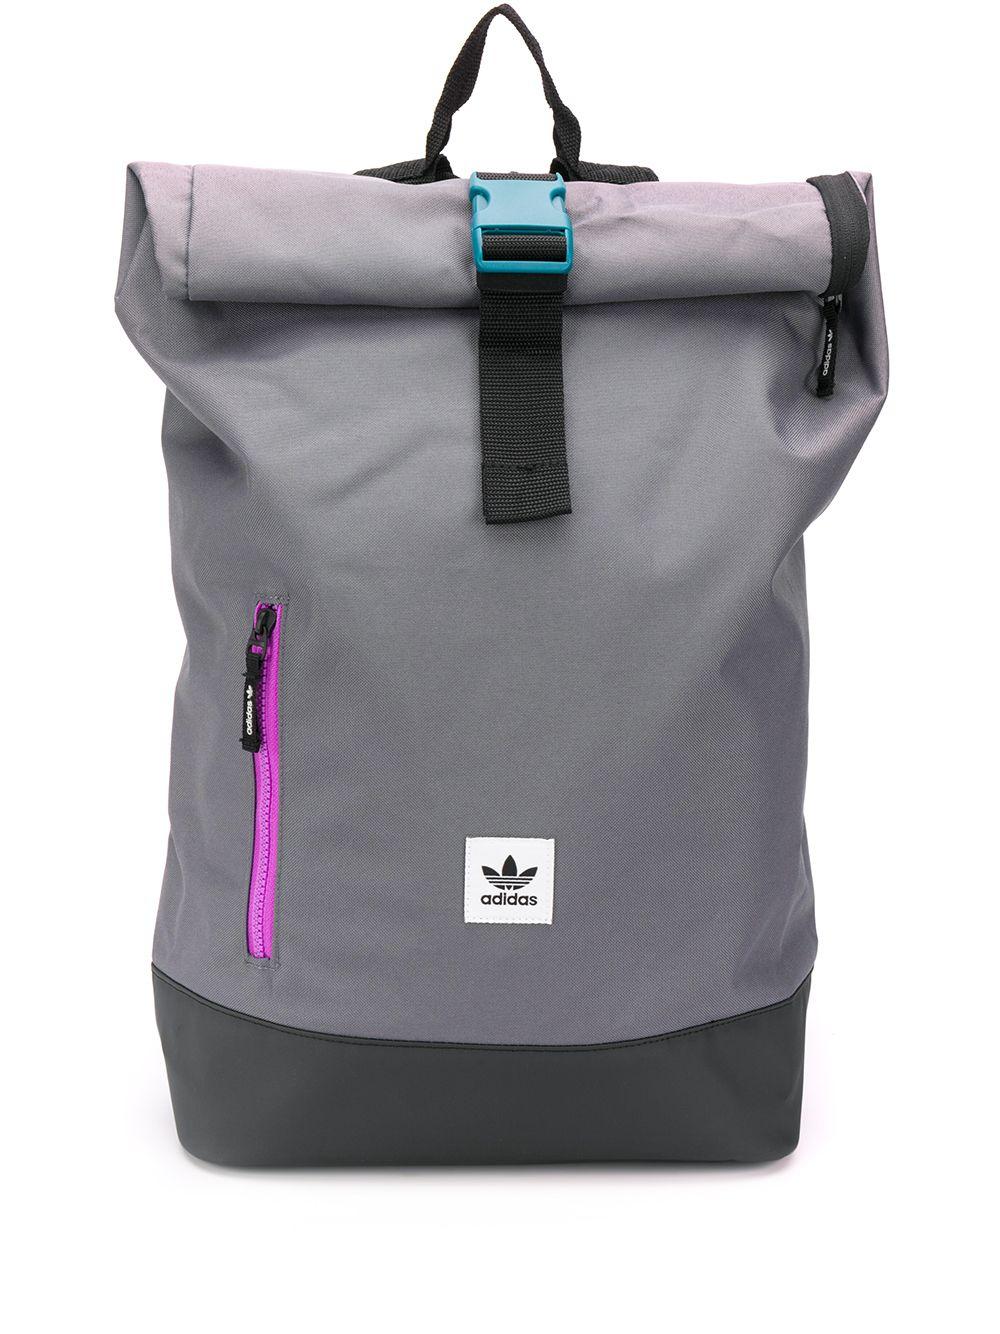 adidas Pe Rolltop Backpack in Gray | Lyst